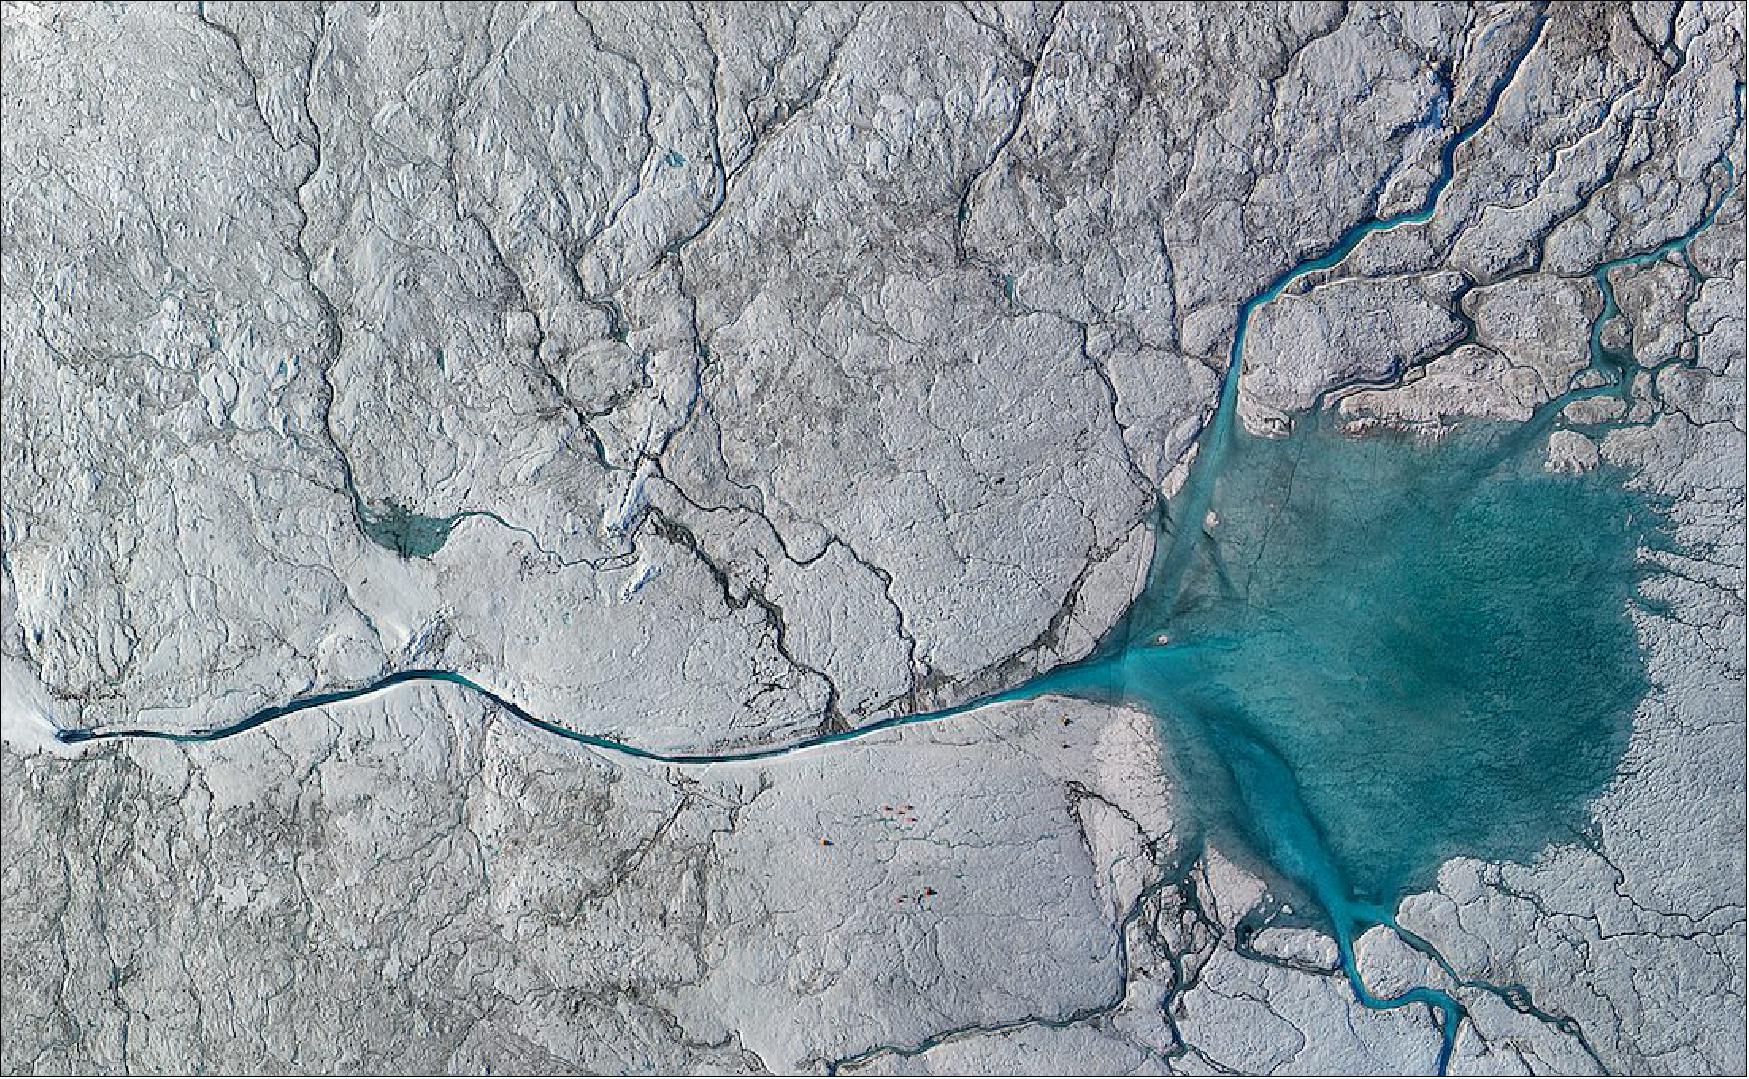 Figure 11: At the fringes of the Greenland Ice Sheet, where glaciers are constantly melting, water rushes everywhere through an intricate system of lakes and streams that branch out like slip and slide shoots of super chilled, bright turquoise water. Some of that water eventually cascades straight into the surrounding land and ocean through channels and cracks. Some of it thunders off into sinkhole-like structures on the ice called moulins. Rumbling 24 hours a day, these holes swallow water from the surface and funnel it to the bedrock at the base of the ice (credit: image courtesy of Dr. Laurence C. Smith)